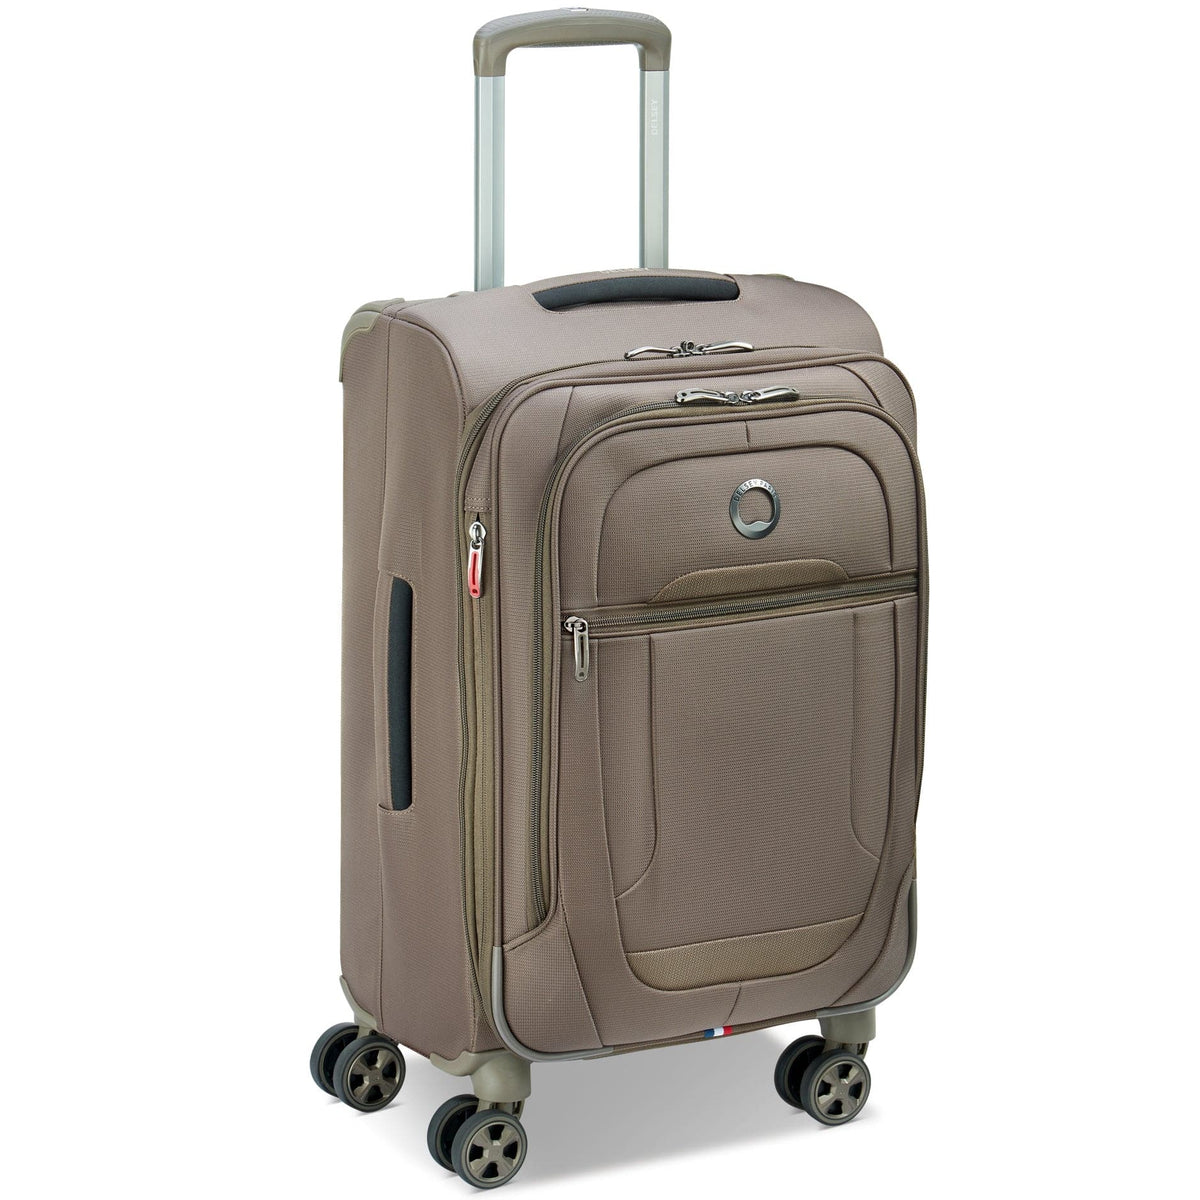 Delsey Helium DLX Expandable Spinner Carry-On Luggage - 21" Small